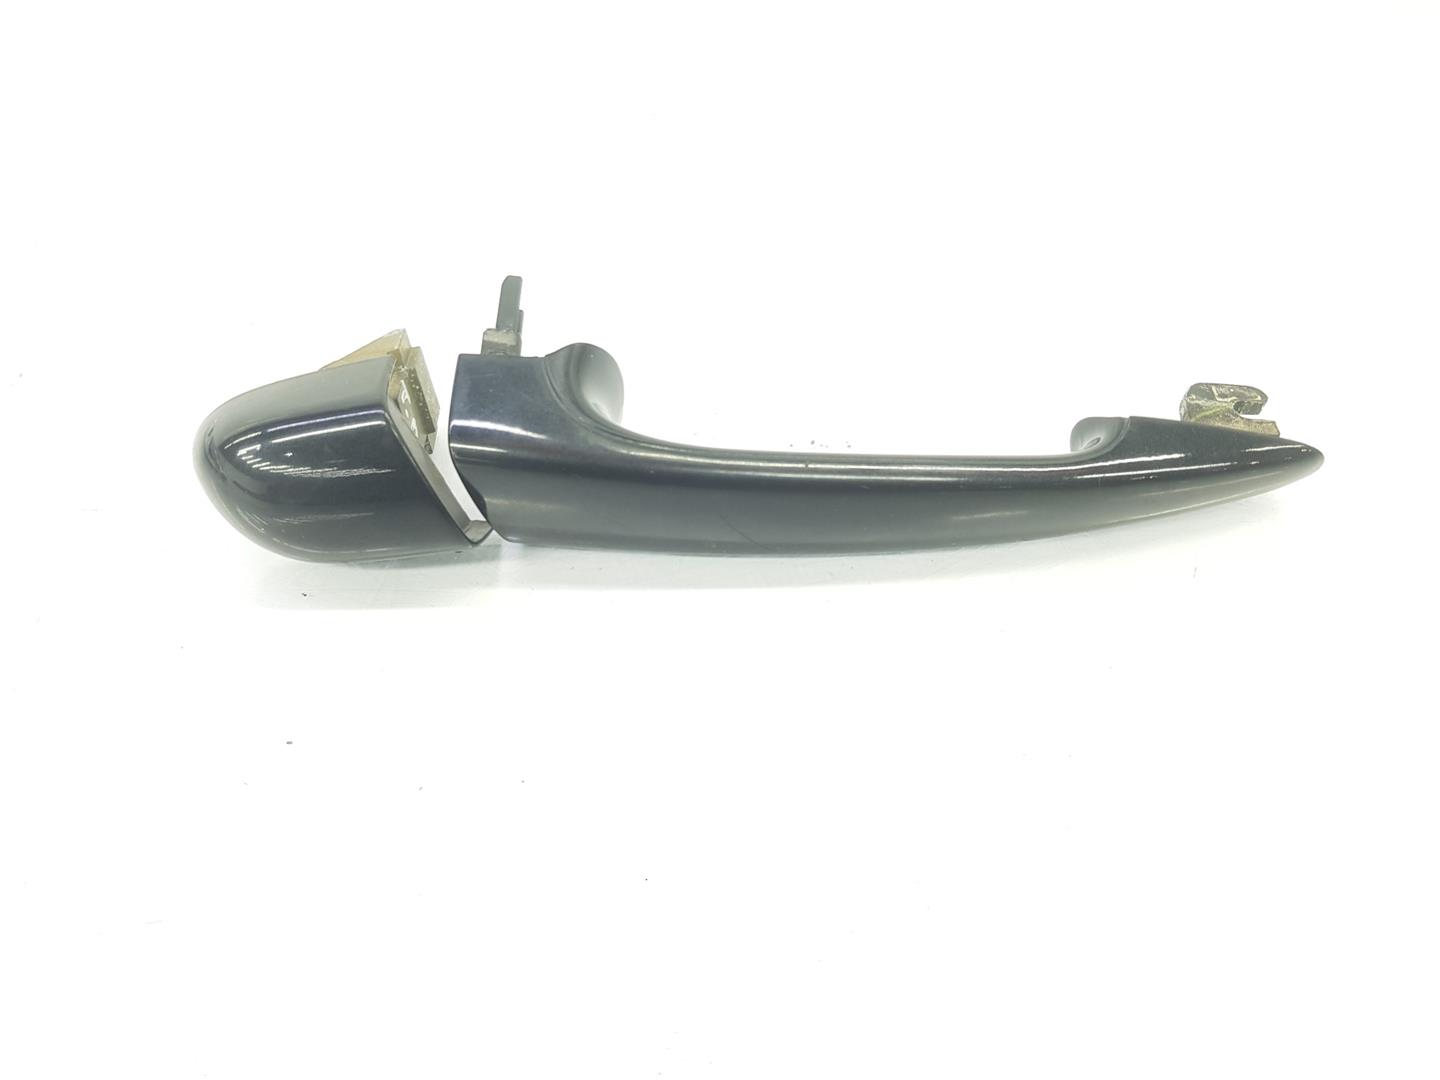 BMW 3 Series E46 (1997-2006) Rear right door outer handle 51217002272, 51217002272, COLORNEGRO475 19809380